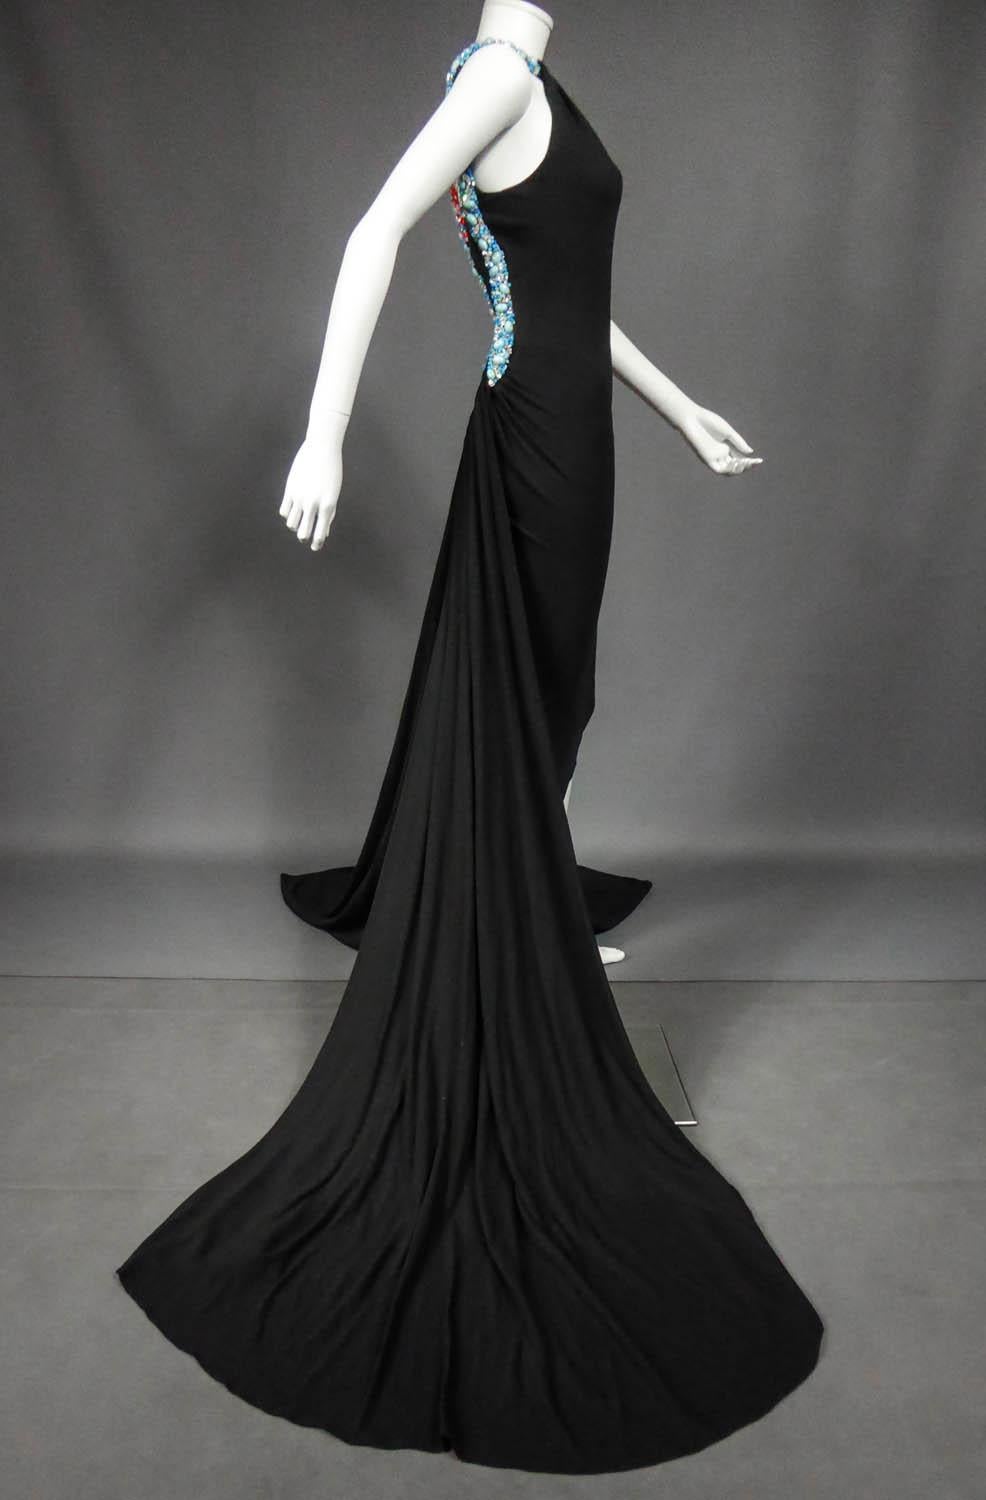 Spring / Summer 2001 Collection
France

Extravagant défilé dress from the Jean-Louis Scherrer designer house by Stéphane Rolland in black jersey from the Spring-Summer 2001 collection. Knee-length sheath dress with long trains projected towards the